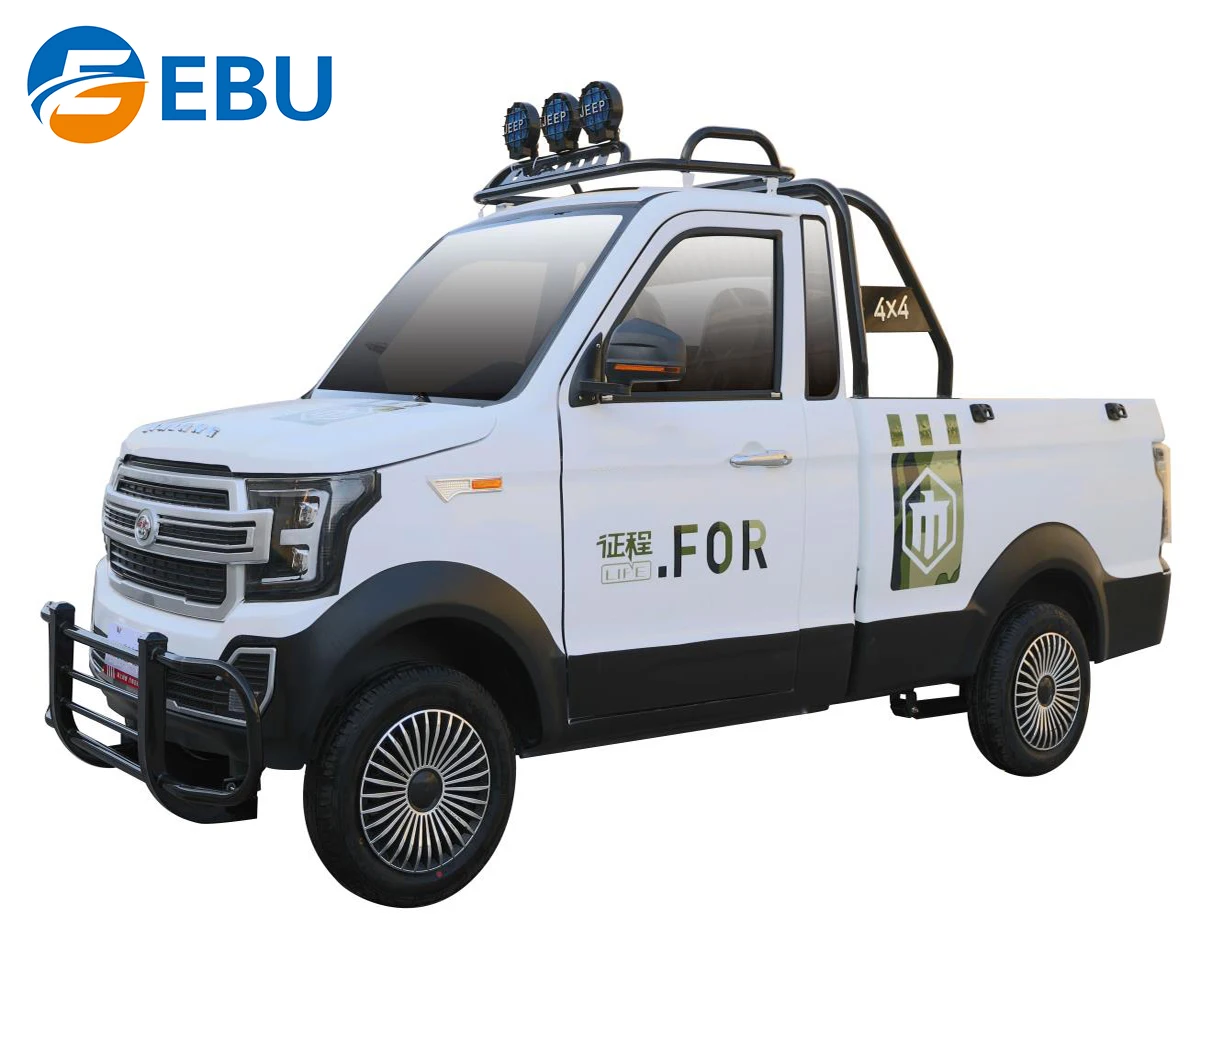 
EBU Left/Right Hot Sale New Model Chinese 2 Seats High Performance Electric Pickup Truck Car  (1600065771180)